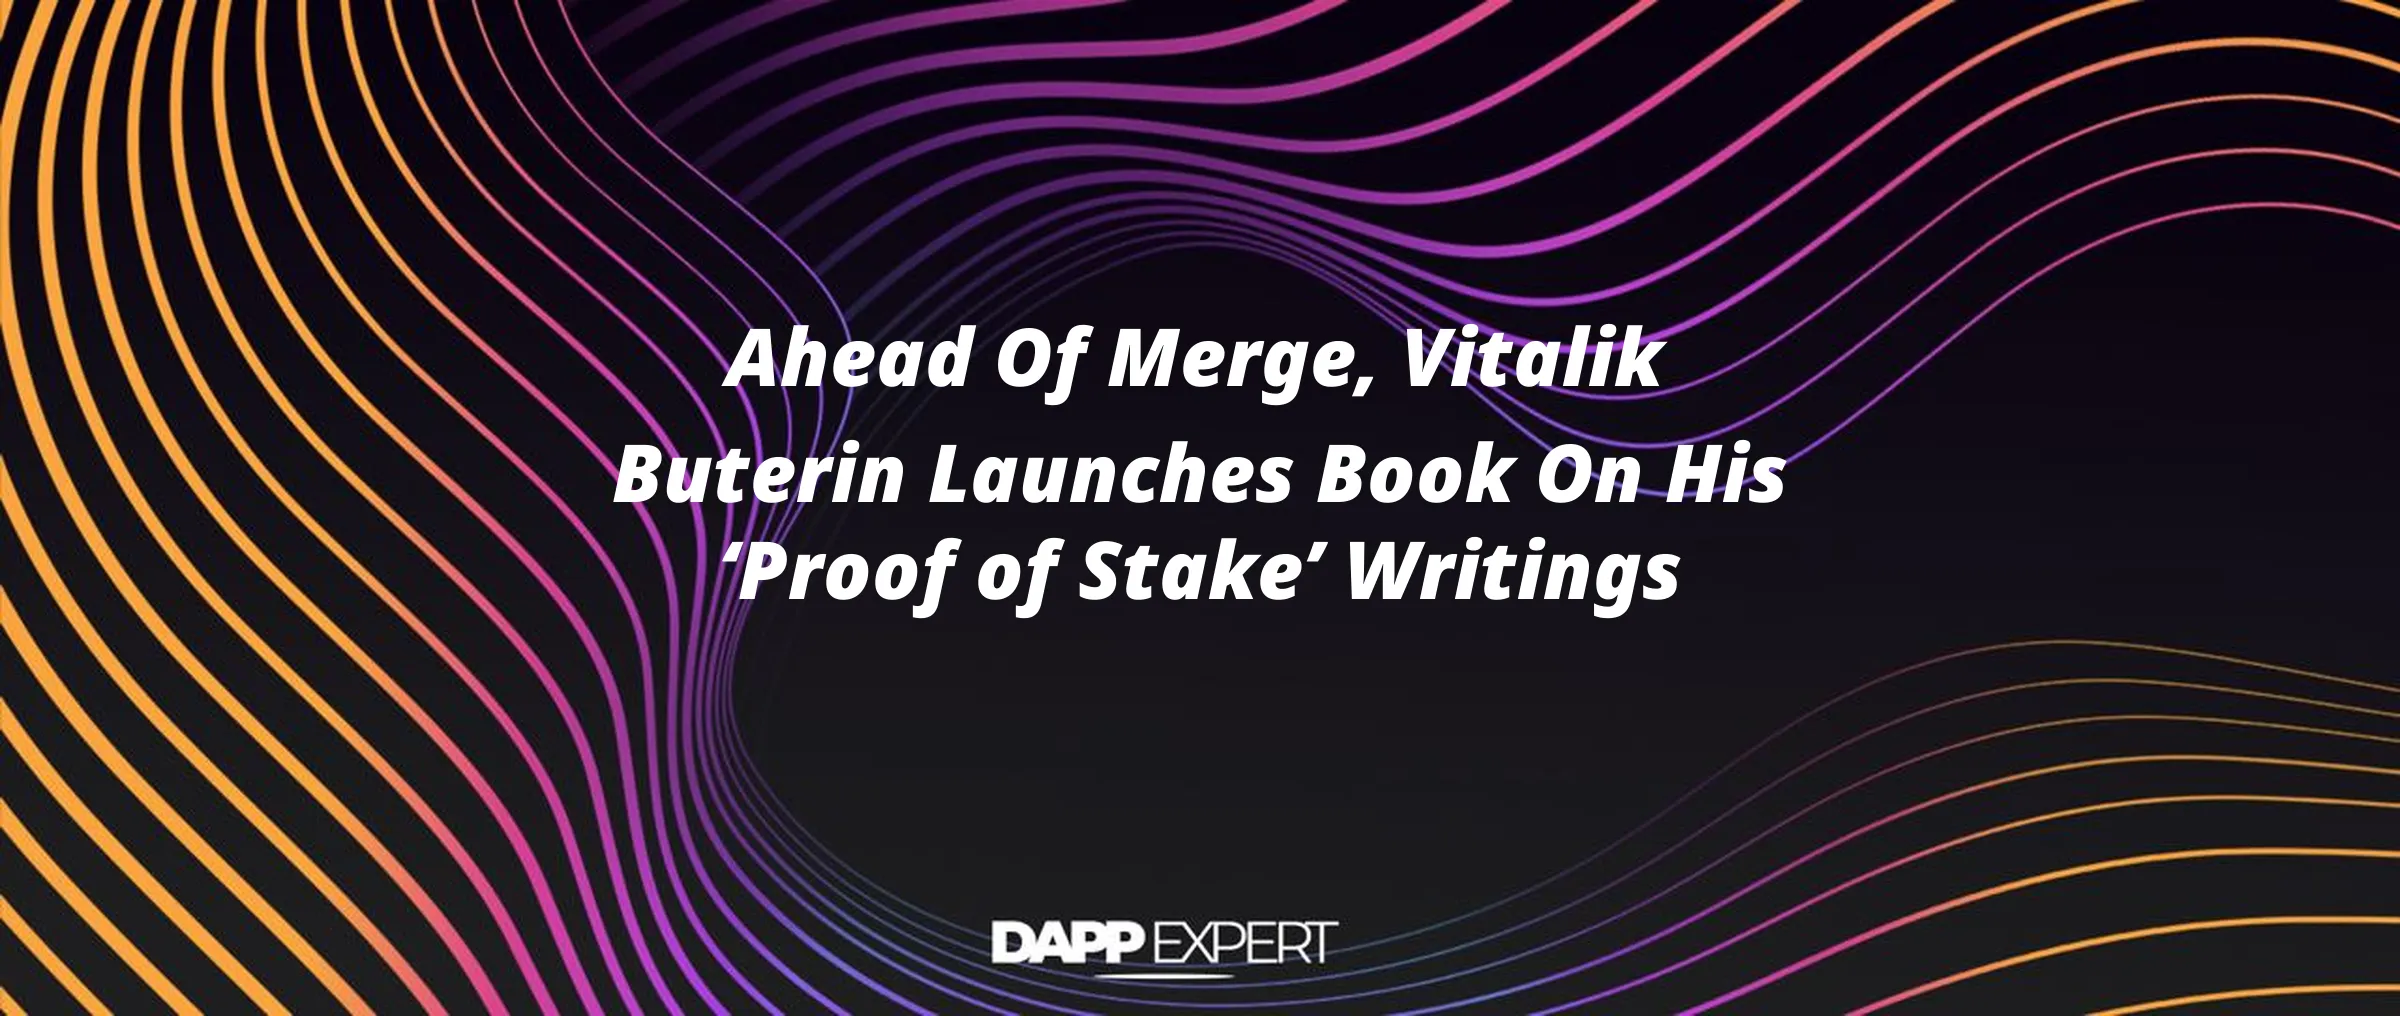 Ahead Of Merge, Vitalik Buterin Launches Book On His ‘Proof of Stake’ Writings